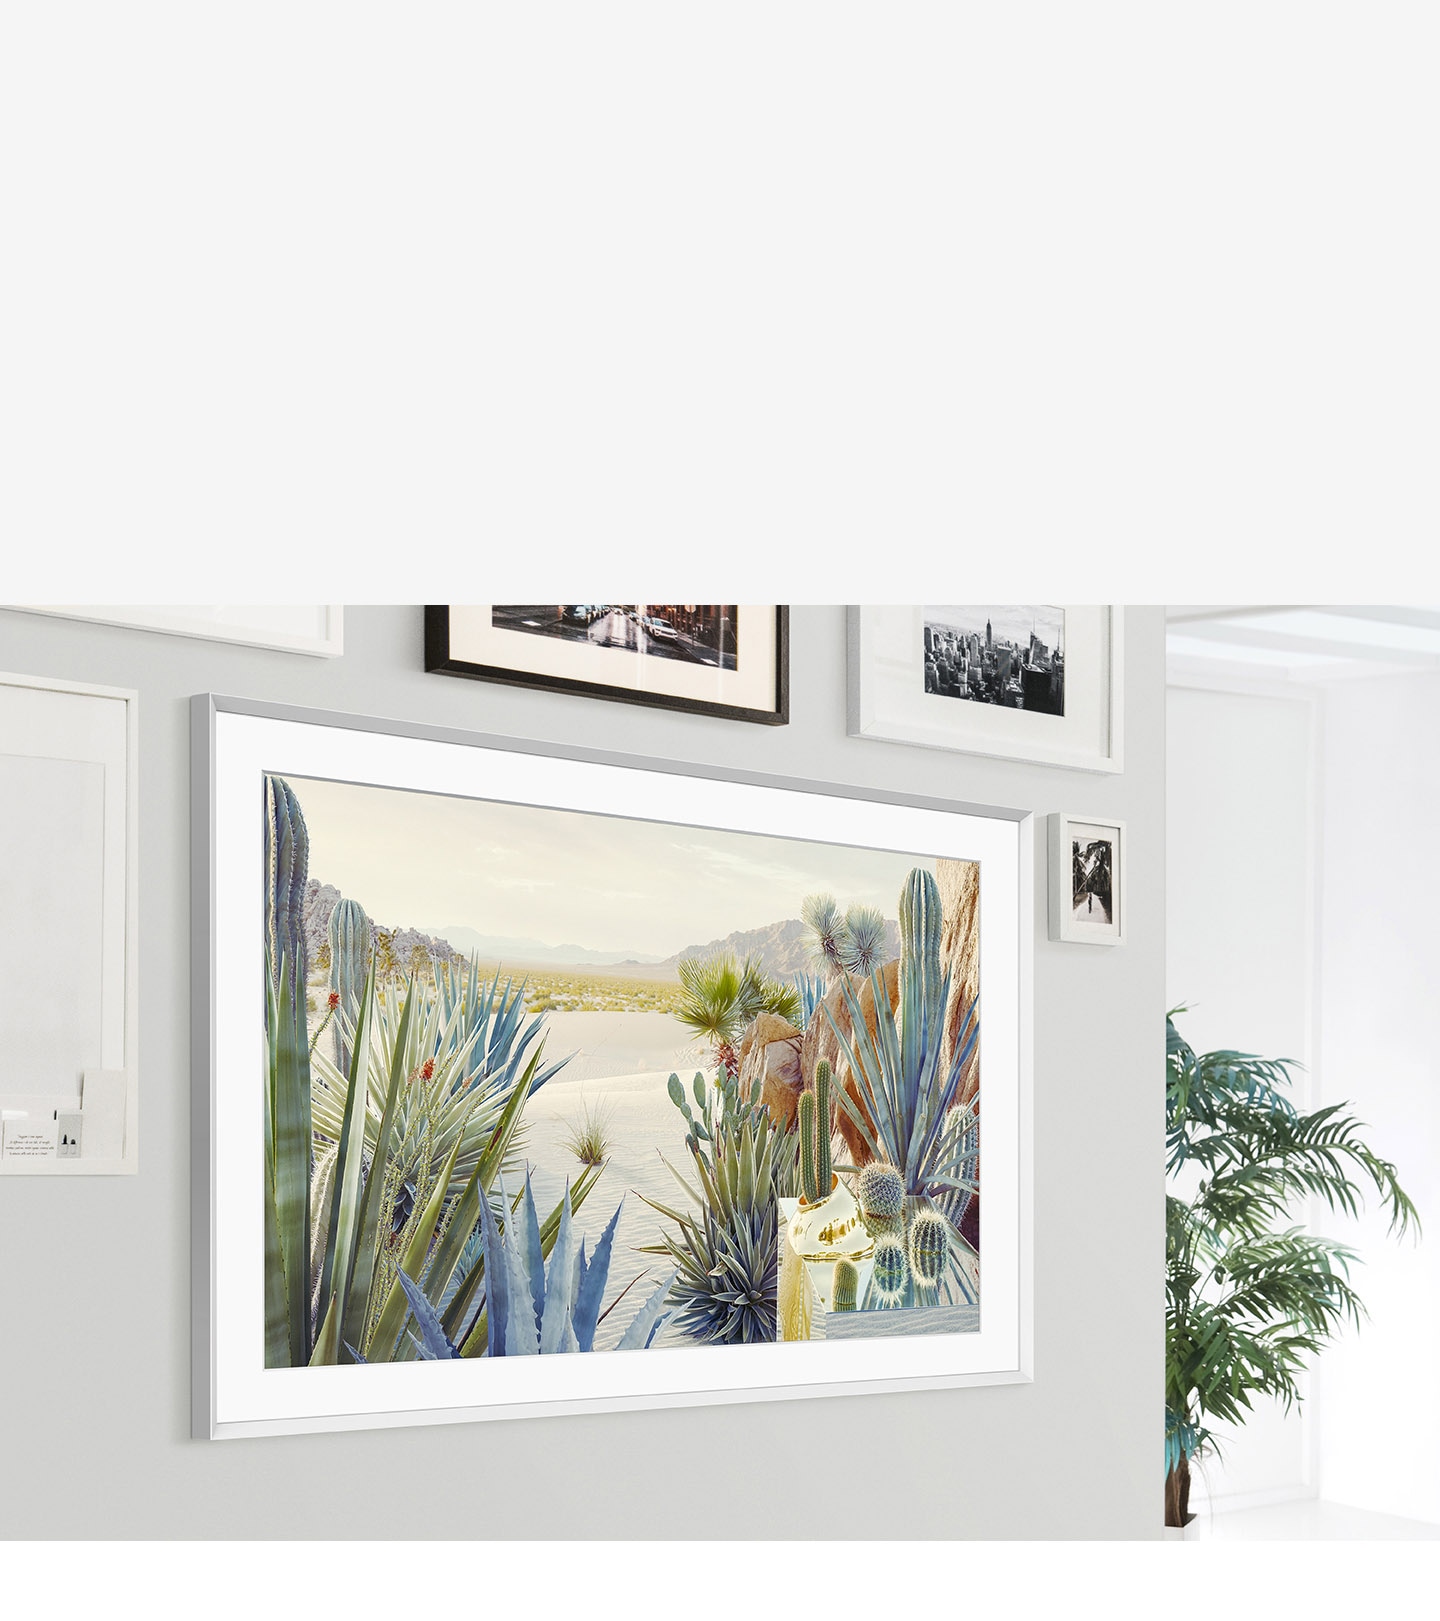 The Frame is mounted on the wall of a home interior and its modern frame design blends with the other picture frameson the wall.